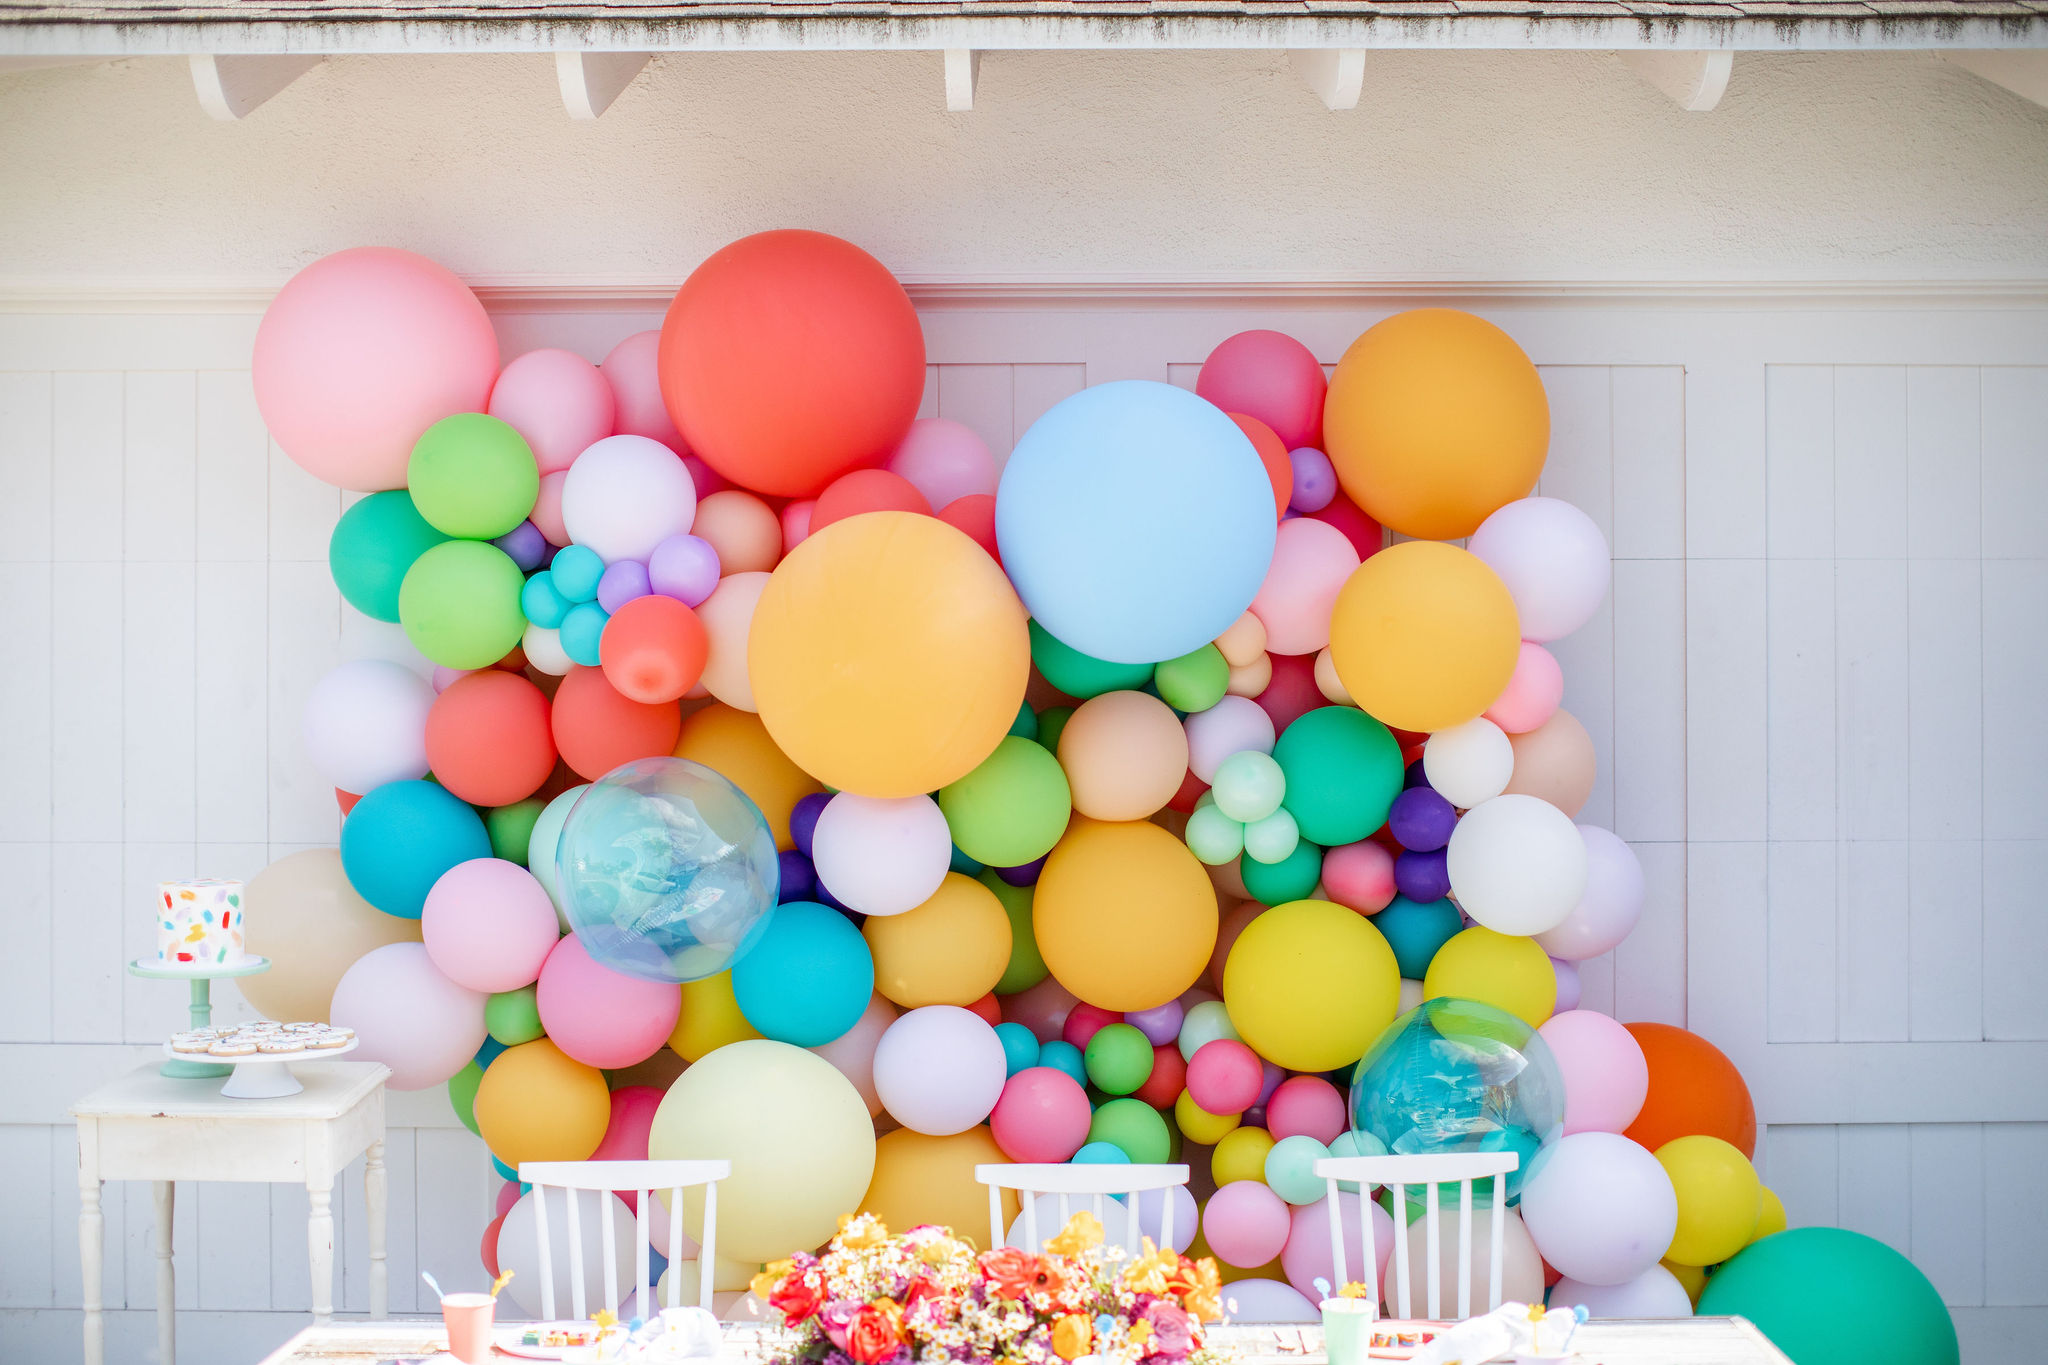 Let’s Create & Celebrate with this Fun and Colorful Art Party!